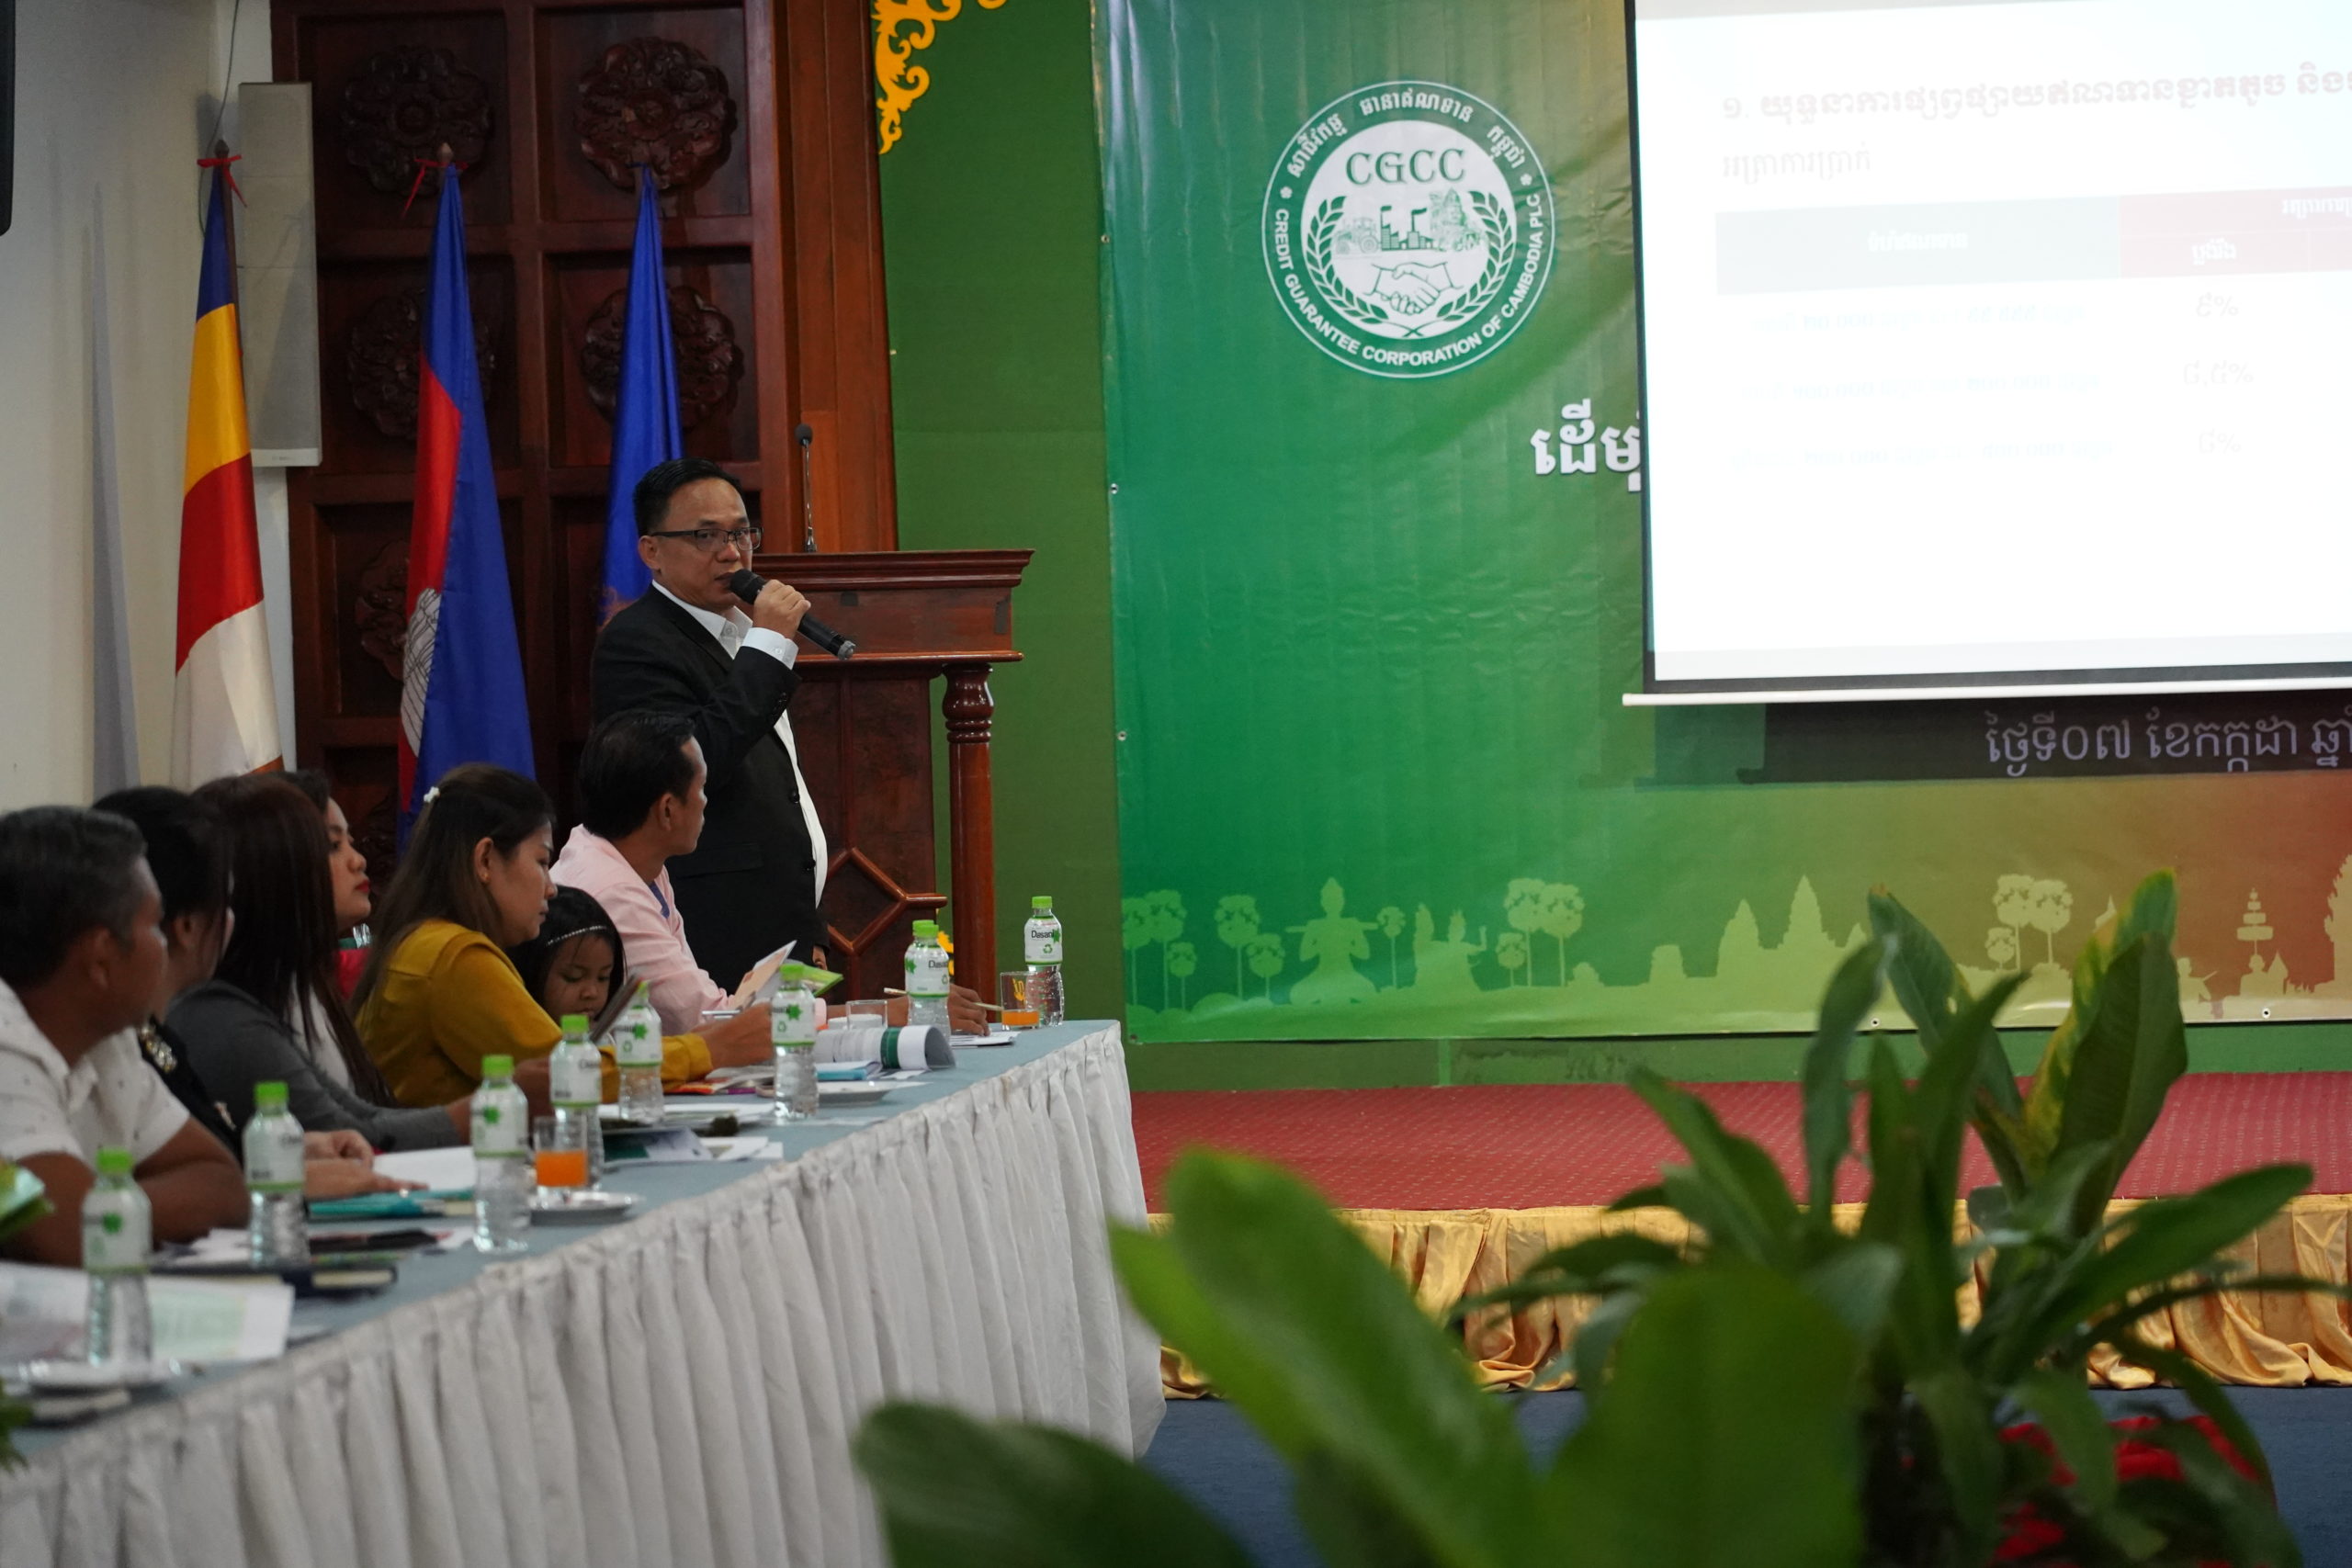 Seminar on “Loans with Credit Guarantees to Support the Development of SMEs” in Battambang and Siem Reap Province